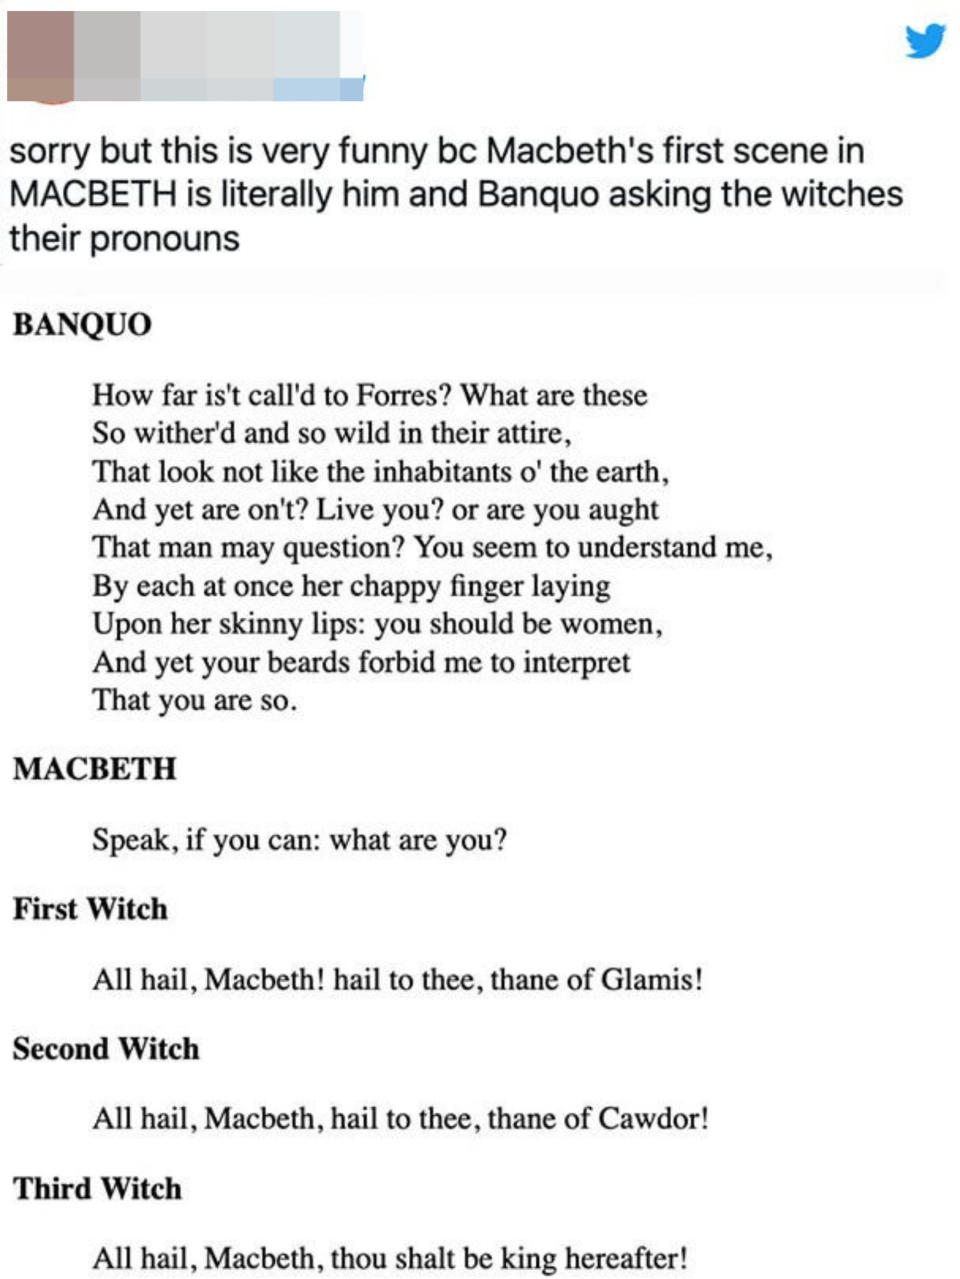 Quotes from "Macbeth"